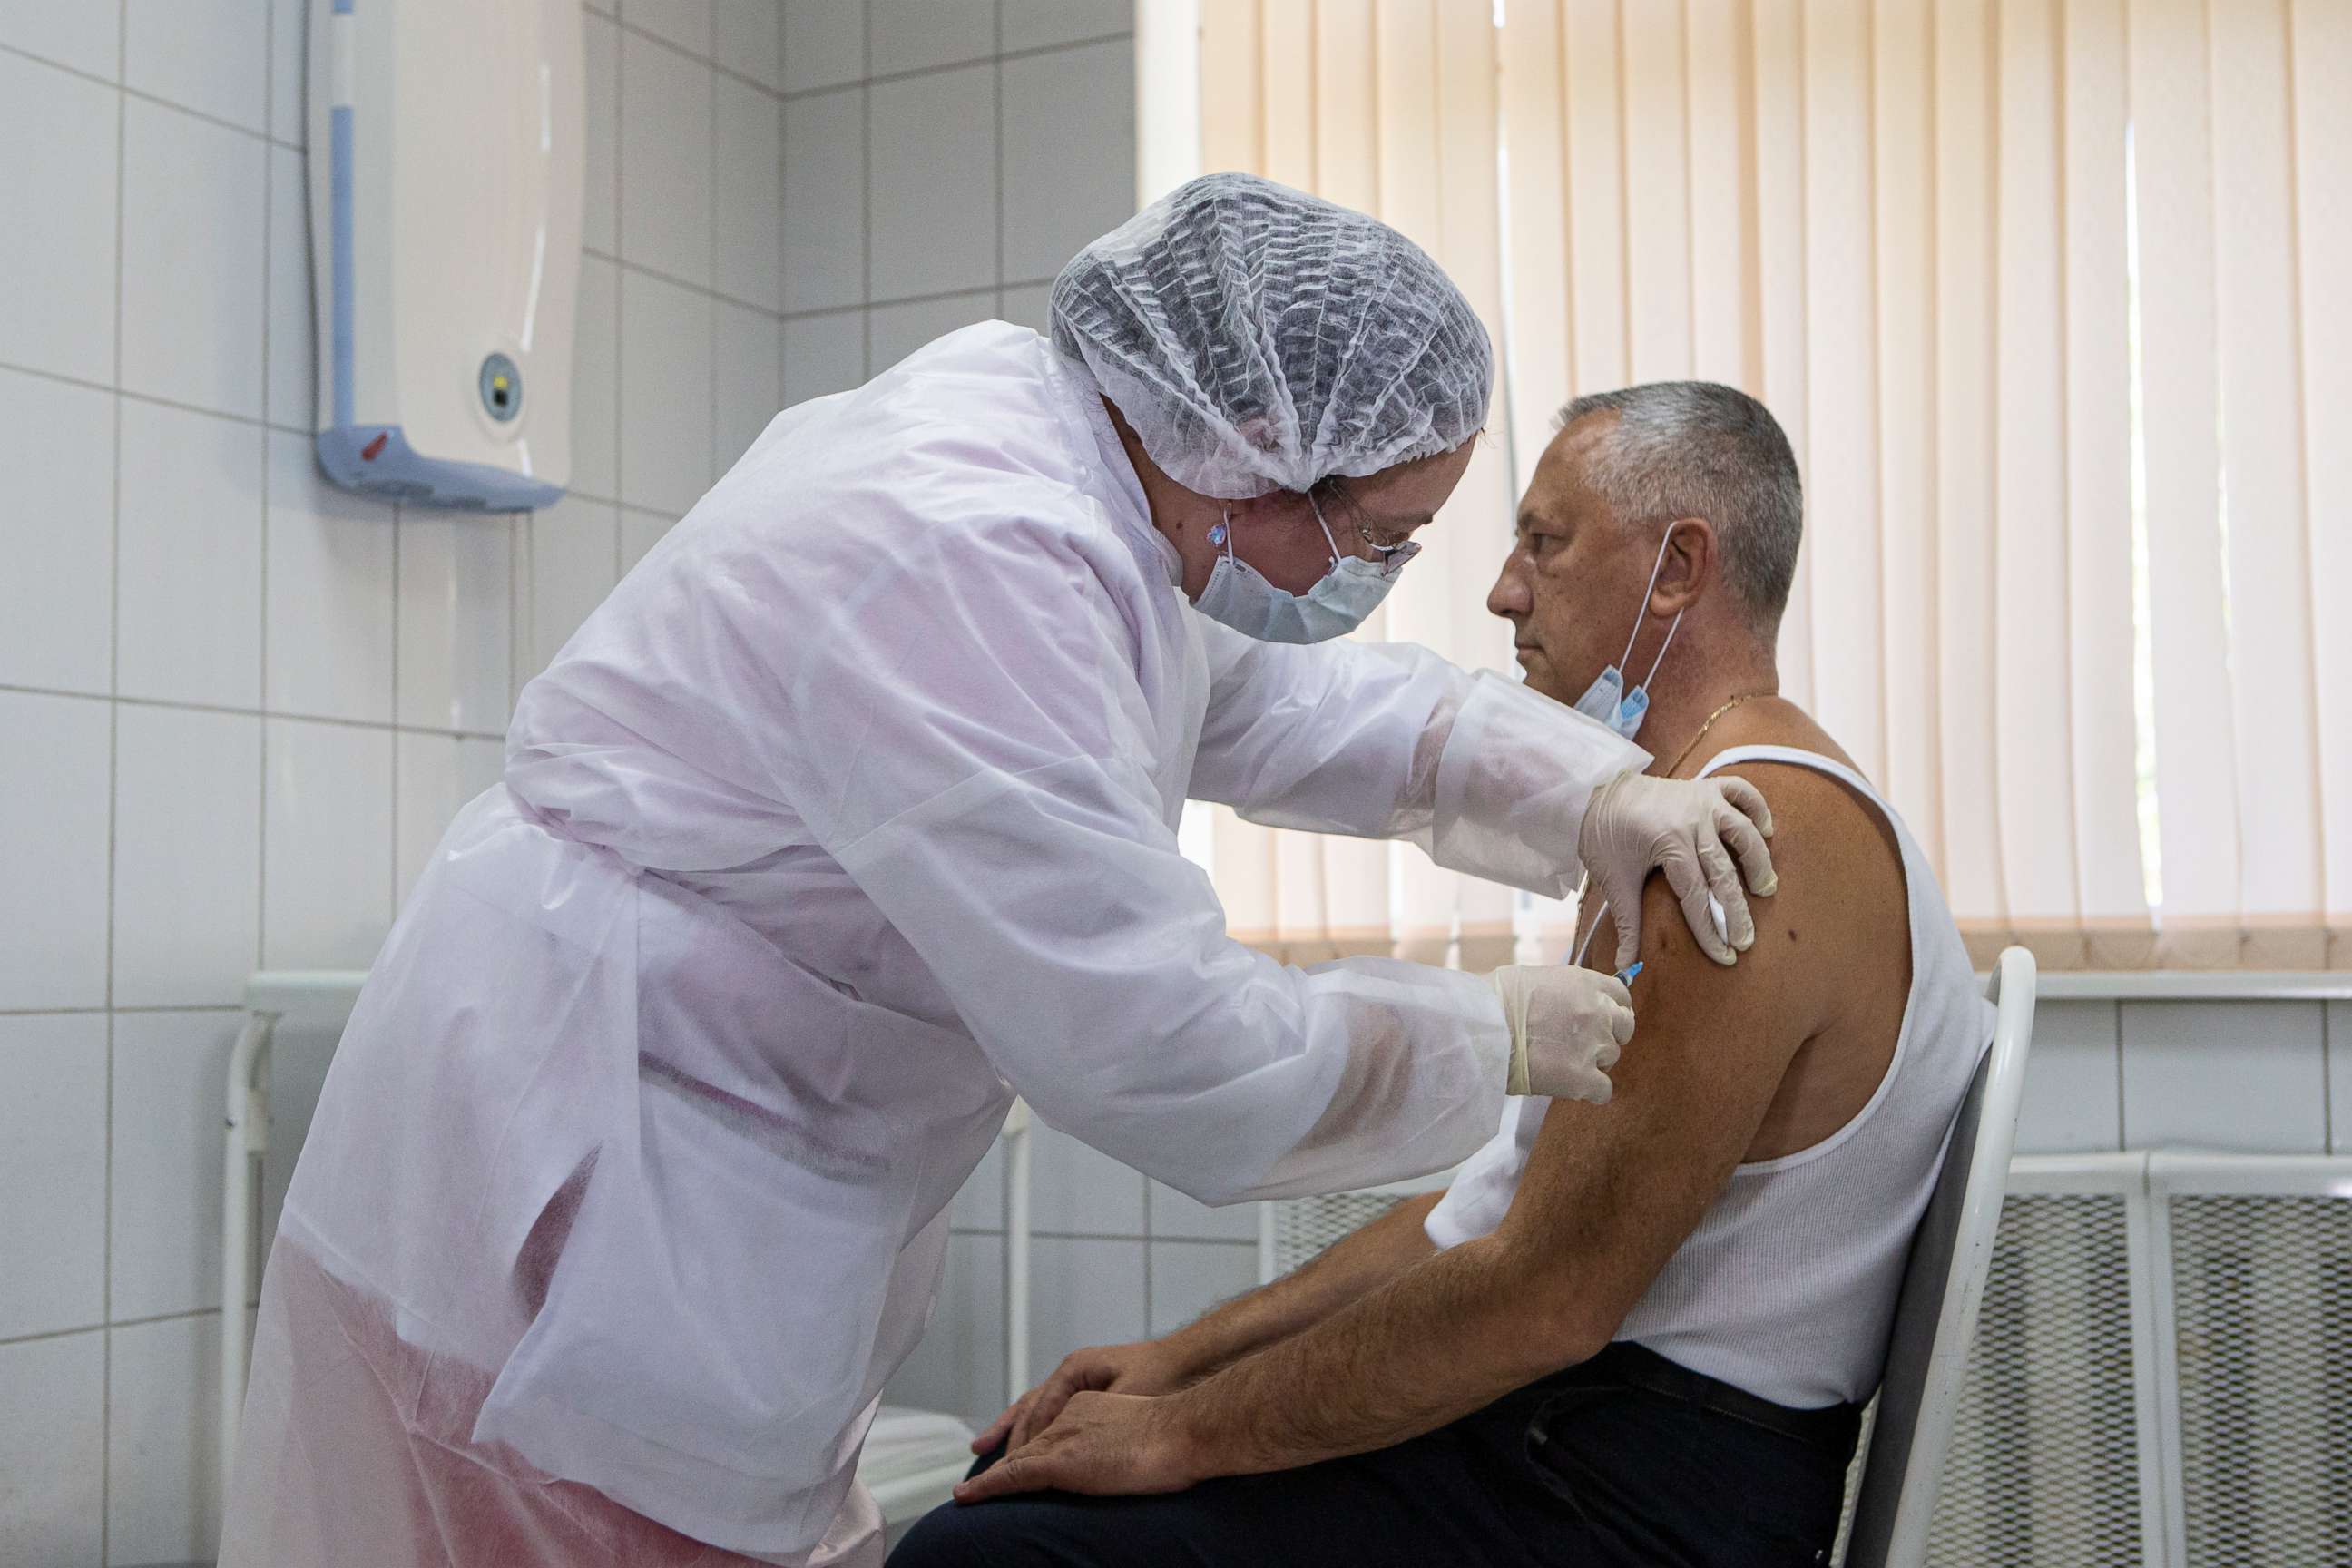 PHOTO: A Russian medical worker administers a shot of Russia's Sputnik V coronavirus vaccine in Moscow on Sept. 15, 2020. Russian health authorities have launched trials of the vaccine among 40,000 volunteers, a randomized, placebo-controlled study.